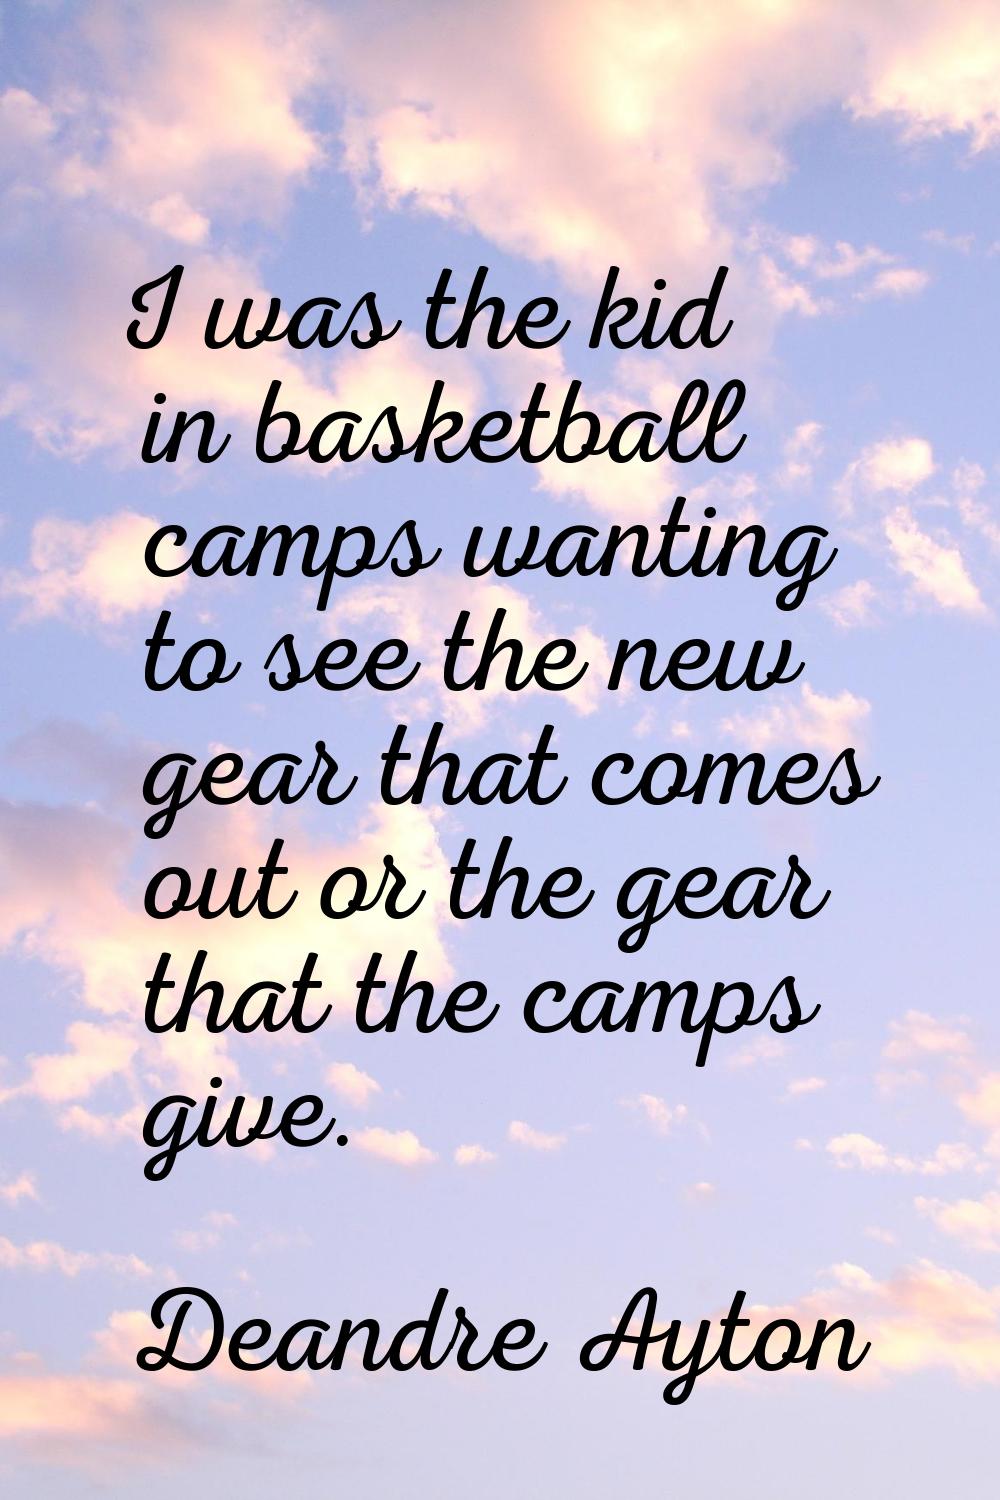 I was the kid in basketball camps wanting to see the new gear that comes out or the gear that the c